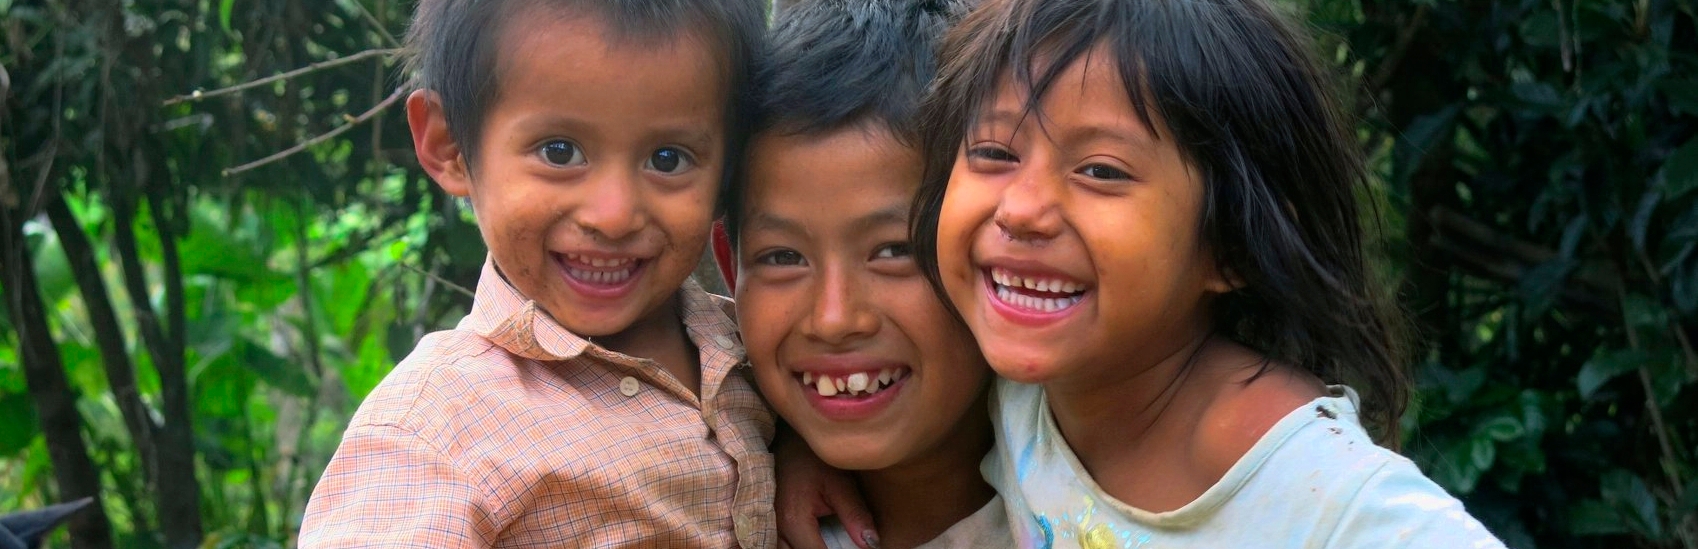 Kevin (age 11) with two of his seven siblings. The nine children are being raised by a single mother, their father left. Kevin is no longer at school as his mother can’t afford the costs. He helps his mother when he can, picking tomatoes or cutting coffee if they can find work due to the coffee rust – a blight that is killing coffee plants. The younger siblings are losing weight; the youngest has severe diarrhea due to poor hygiene and no sanitation. Save the Children Honduras is helping this family with bananas and other emergency food packages. Photo credit: Save the Children, June 2014.